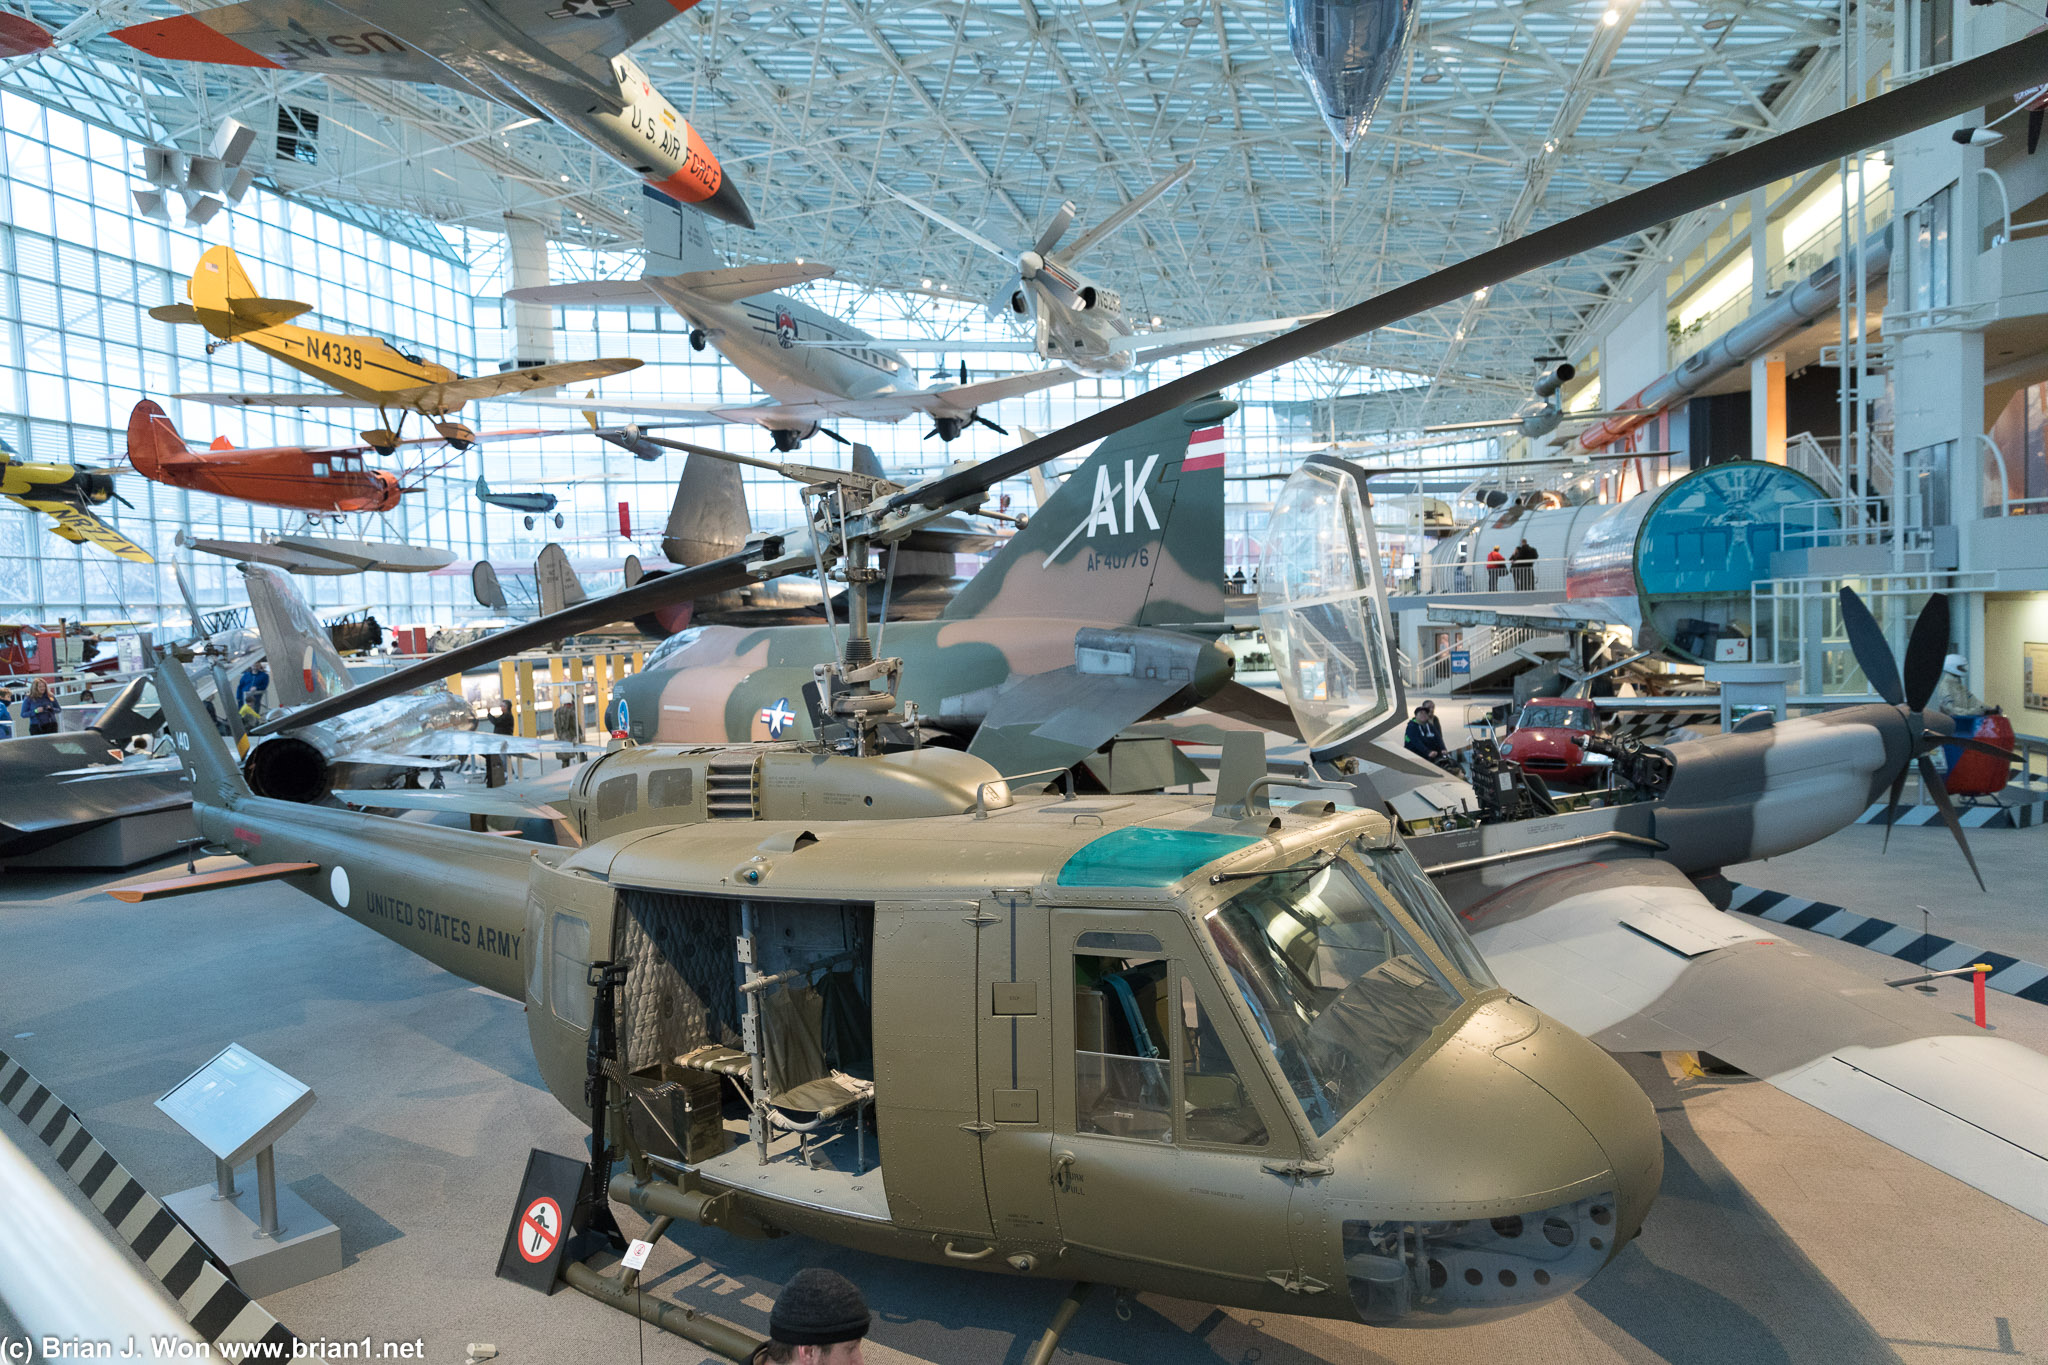 UH-1H Huey in foreground.